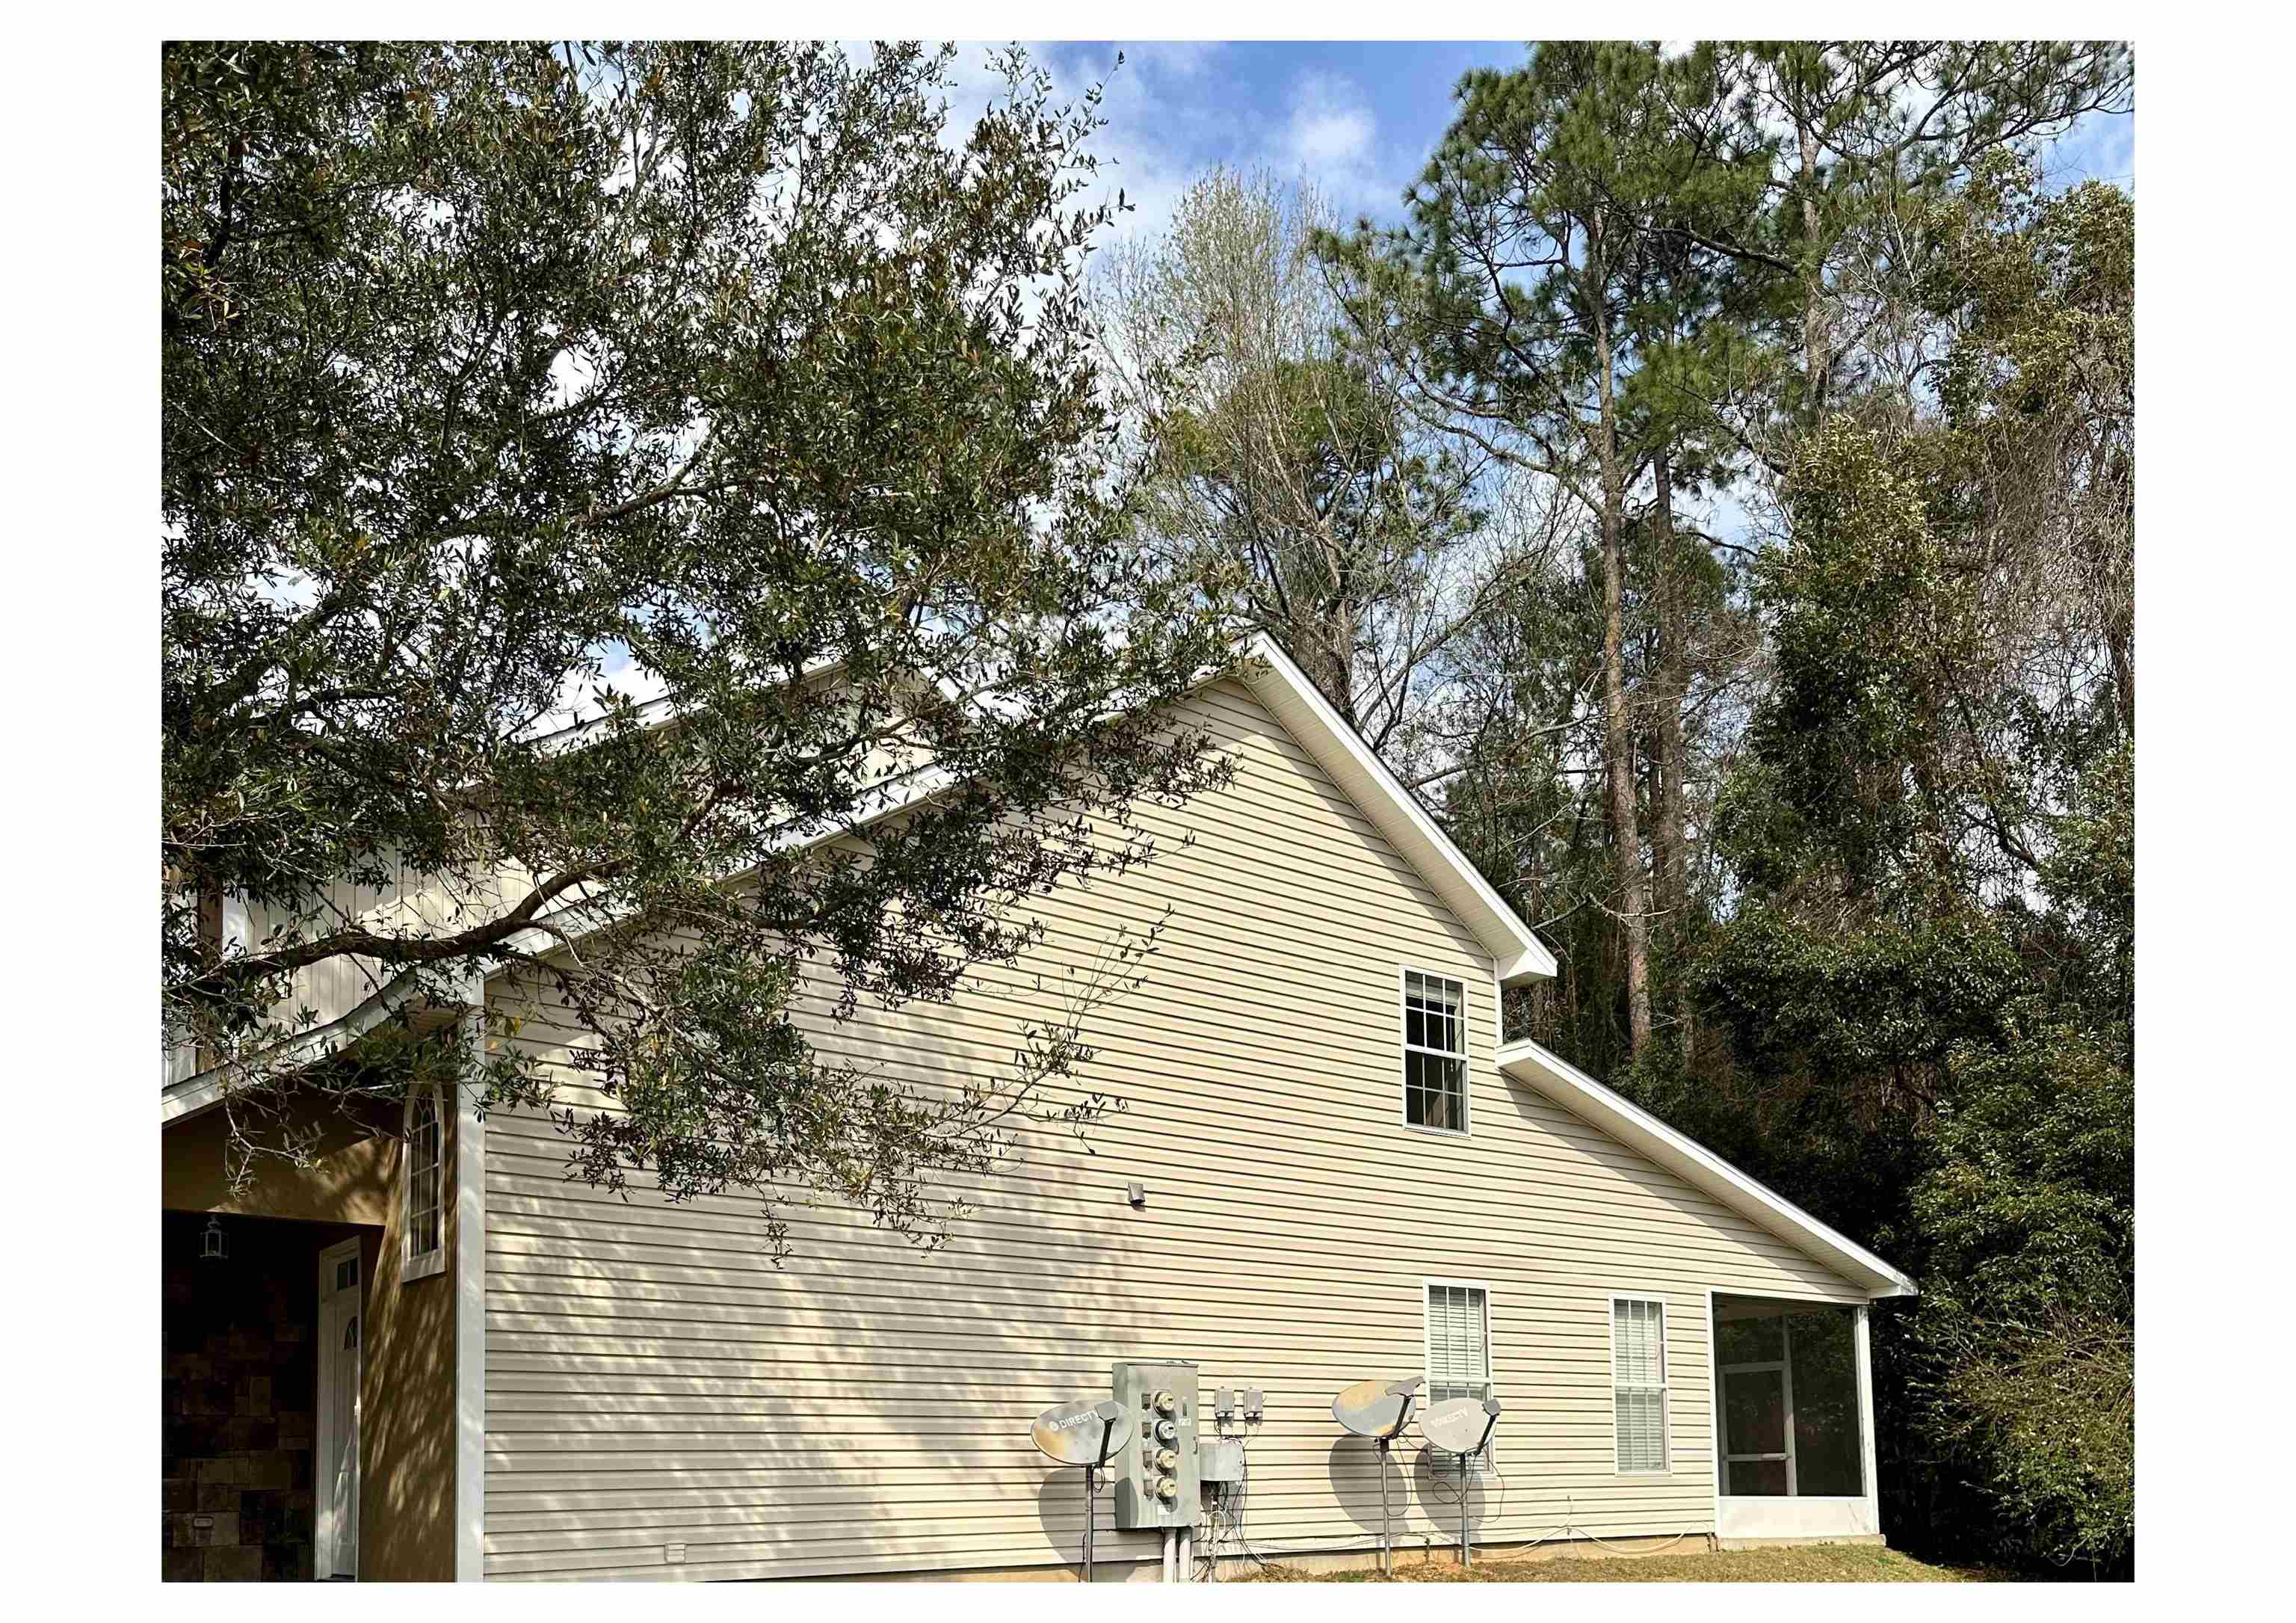 1575 Paul Russell Road,TALLAHASSEE,Florida 32301,3 Bedrooms Bedrooms,2 BathroomsBathrooms,Condo,1575 Paul Russell Road,369221